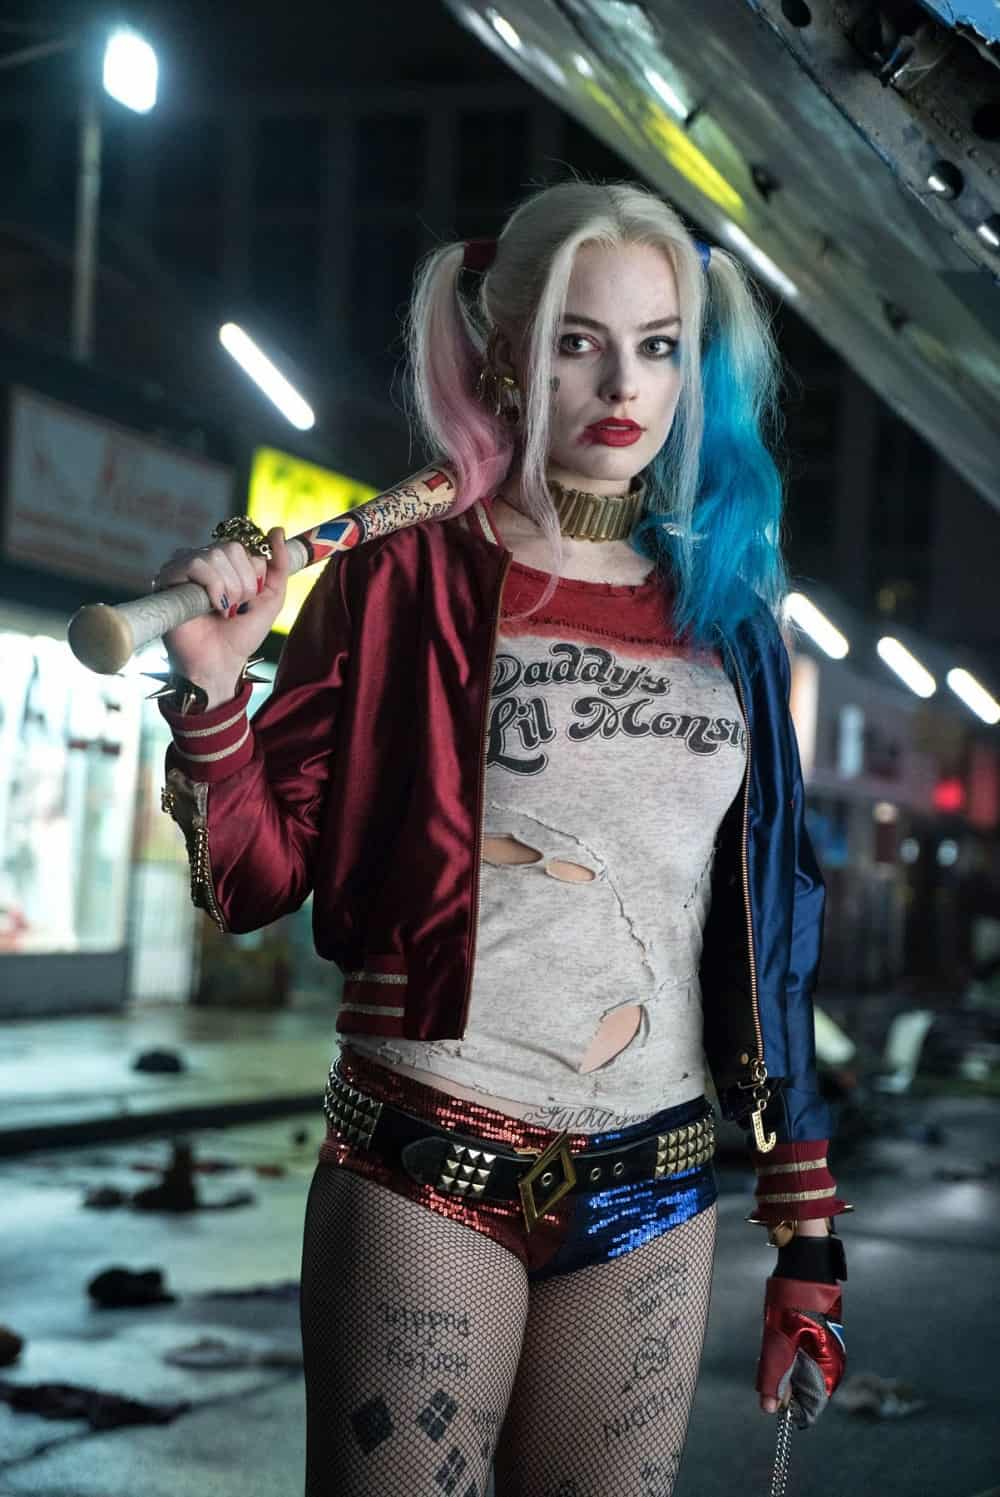 Check Out These New Photo of Margot Robbie as Harley Quinn in 'Suicide Squad!'